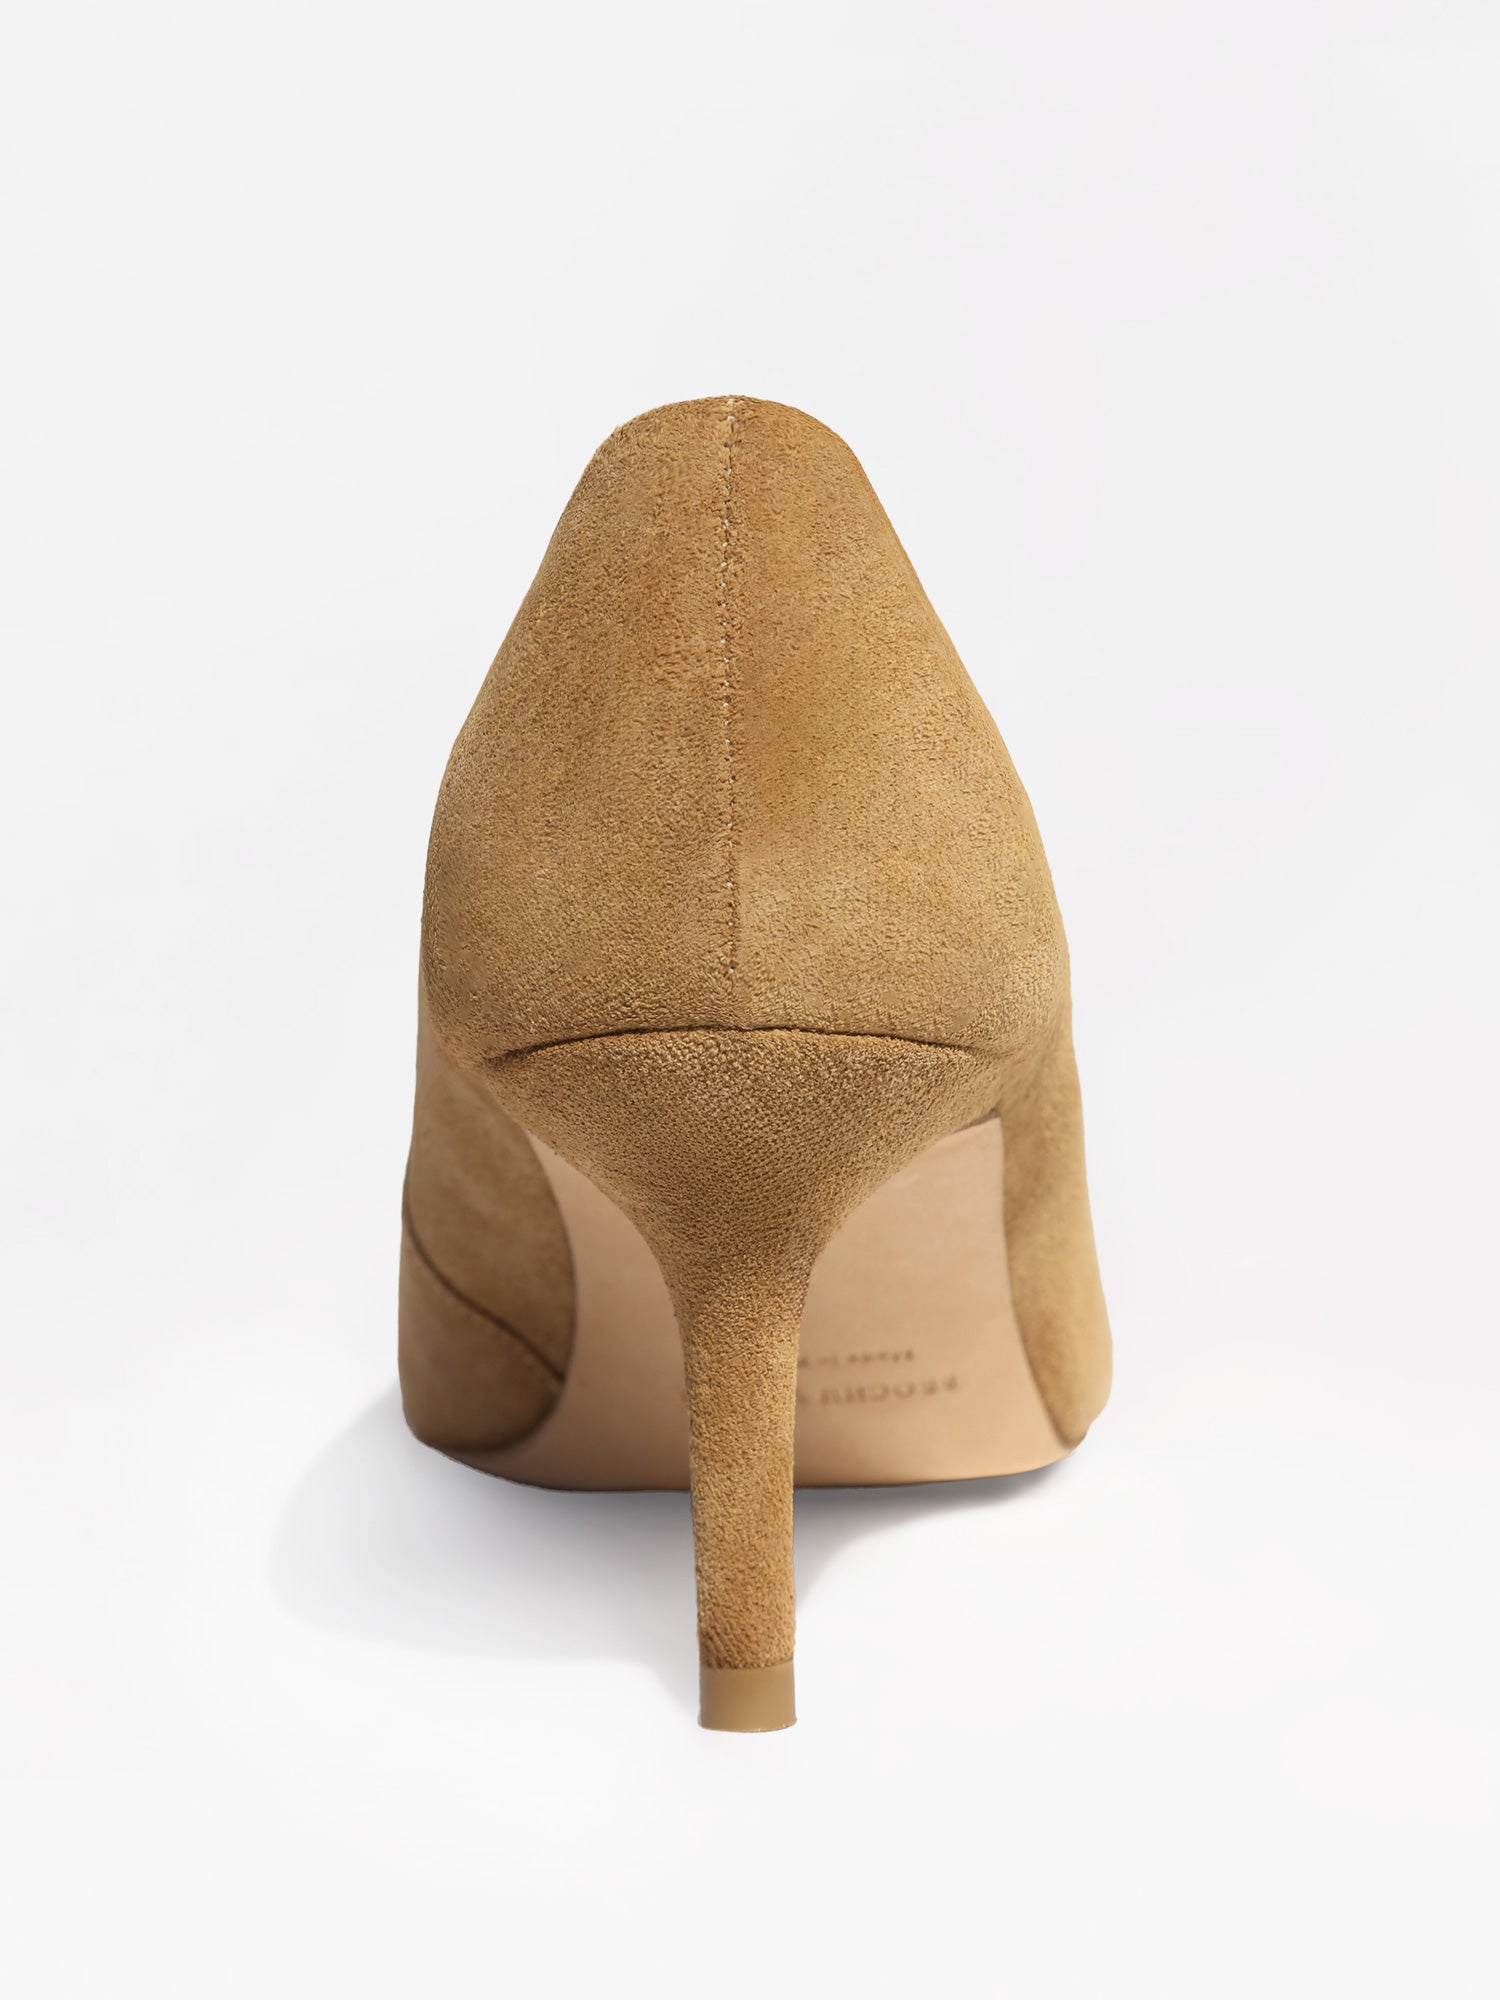 Everyday Tan Suede Pump back view